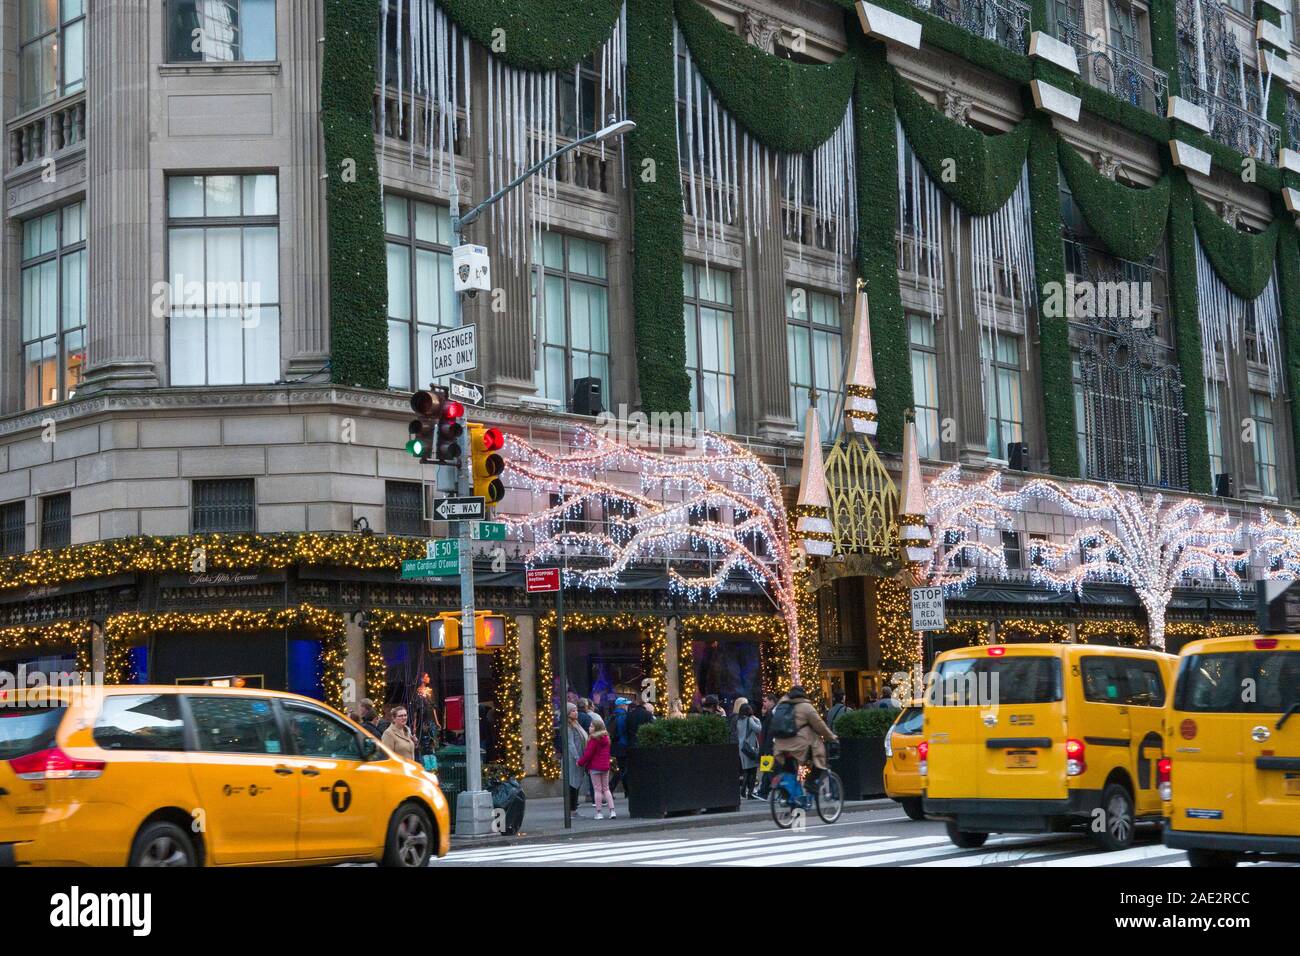 Saks Fifth Avenue Flagship Store is decorated for the holiday season, New York City, USA Stock Photo